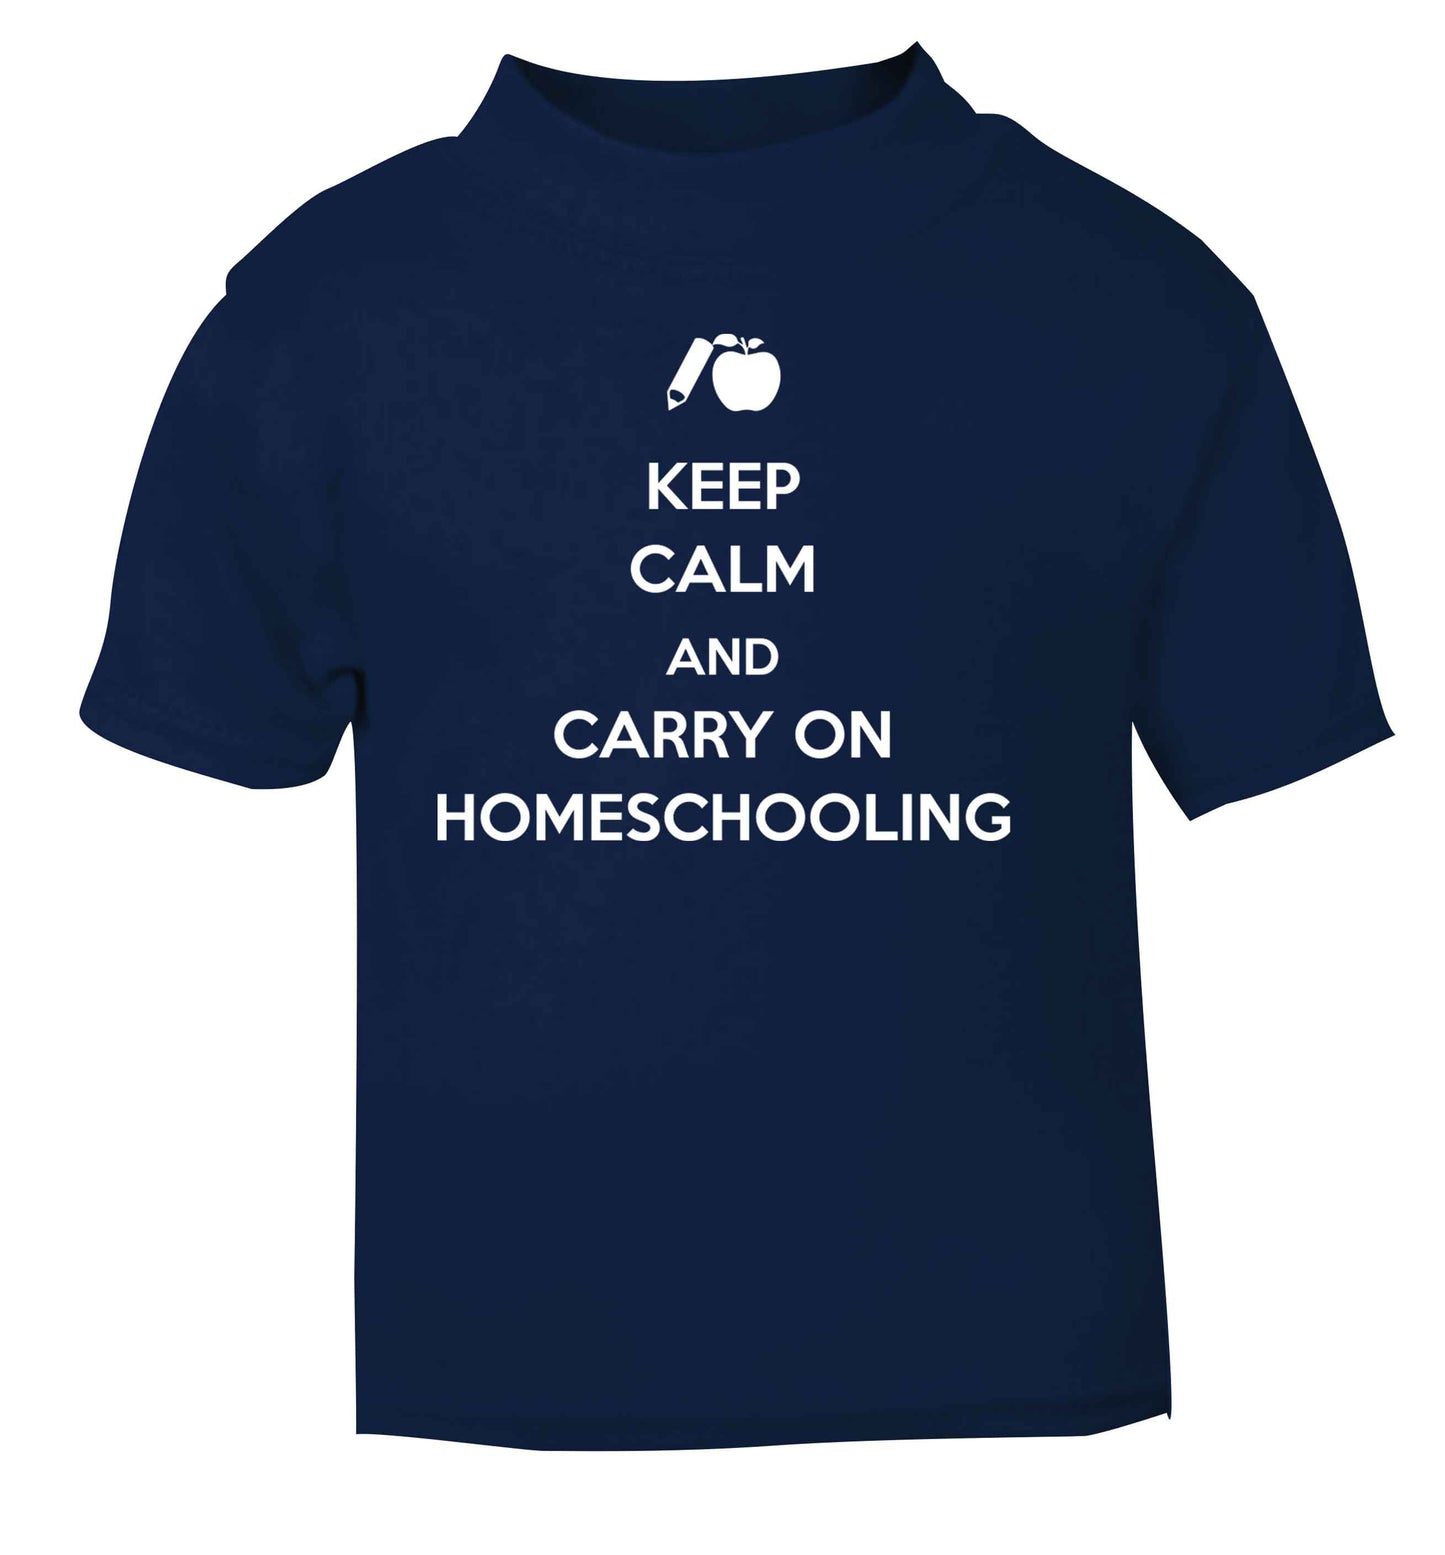 Keep calm and carry on homeschooling navy Baby Toddler Tshirt 2 Years